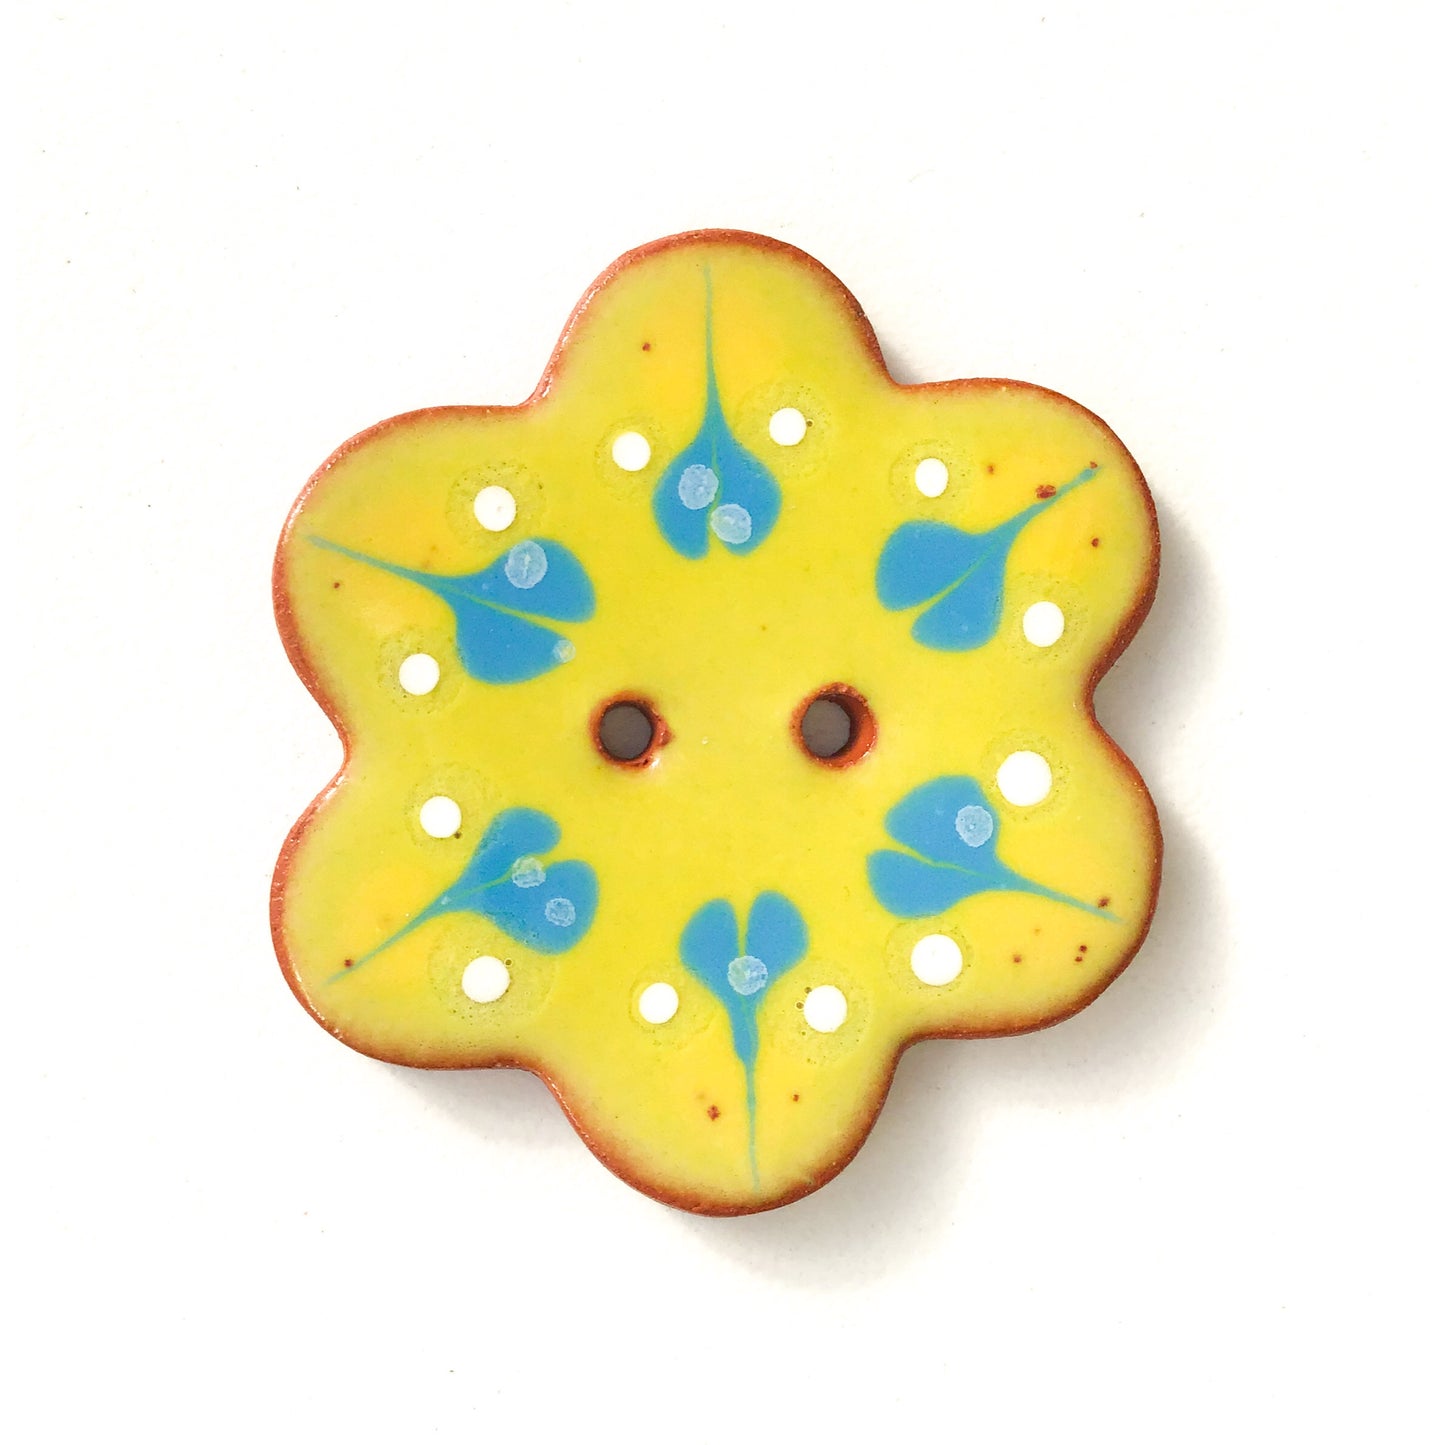 Chartreuse Flower Shaped Ceramic Button - Decorative Clay Buttons - 1 3/8" (ws-47)